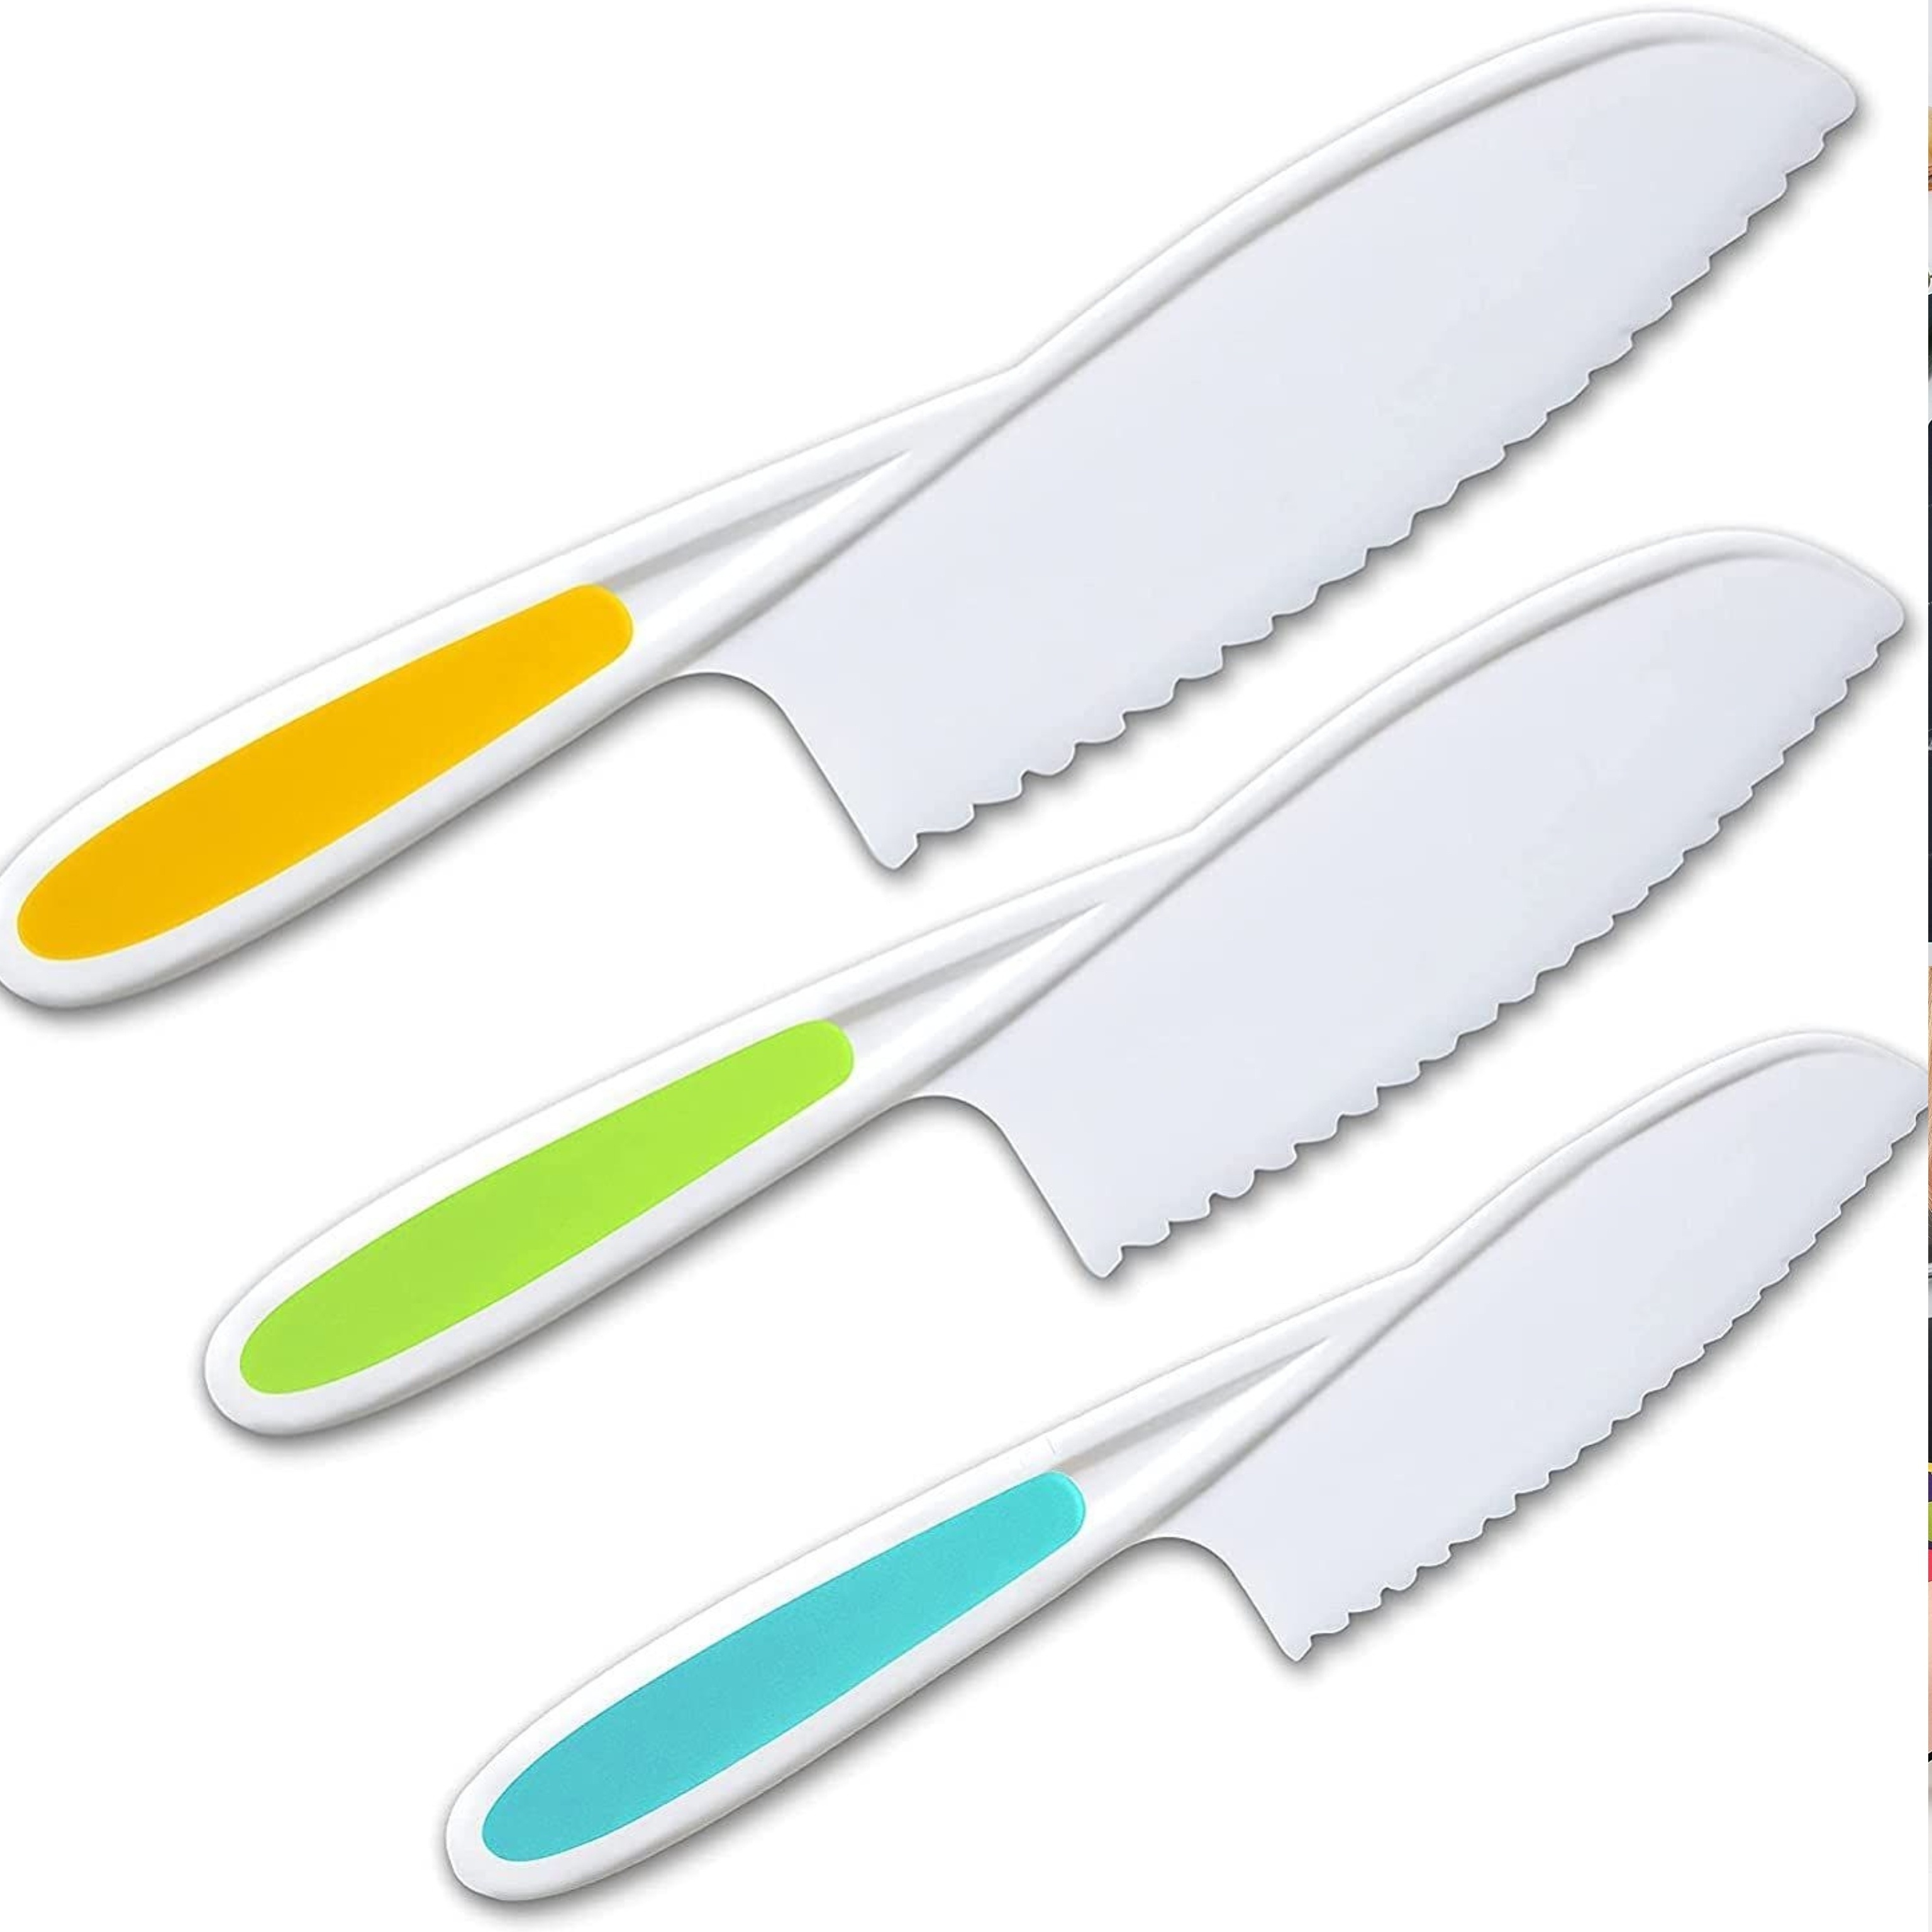 8 Pieces Wooden Kids Kitchen Knifes for Real Cooking Include